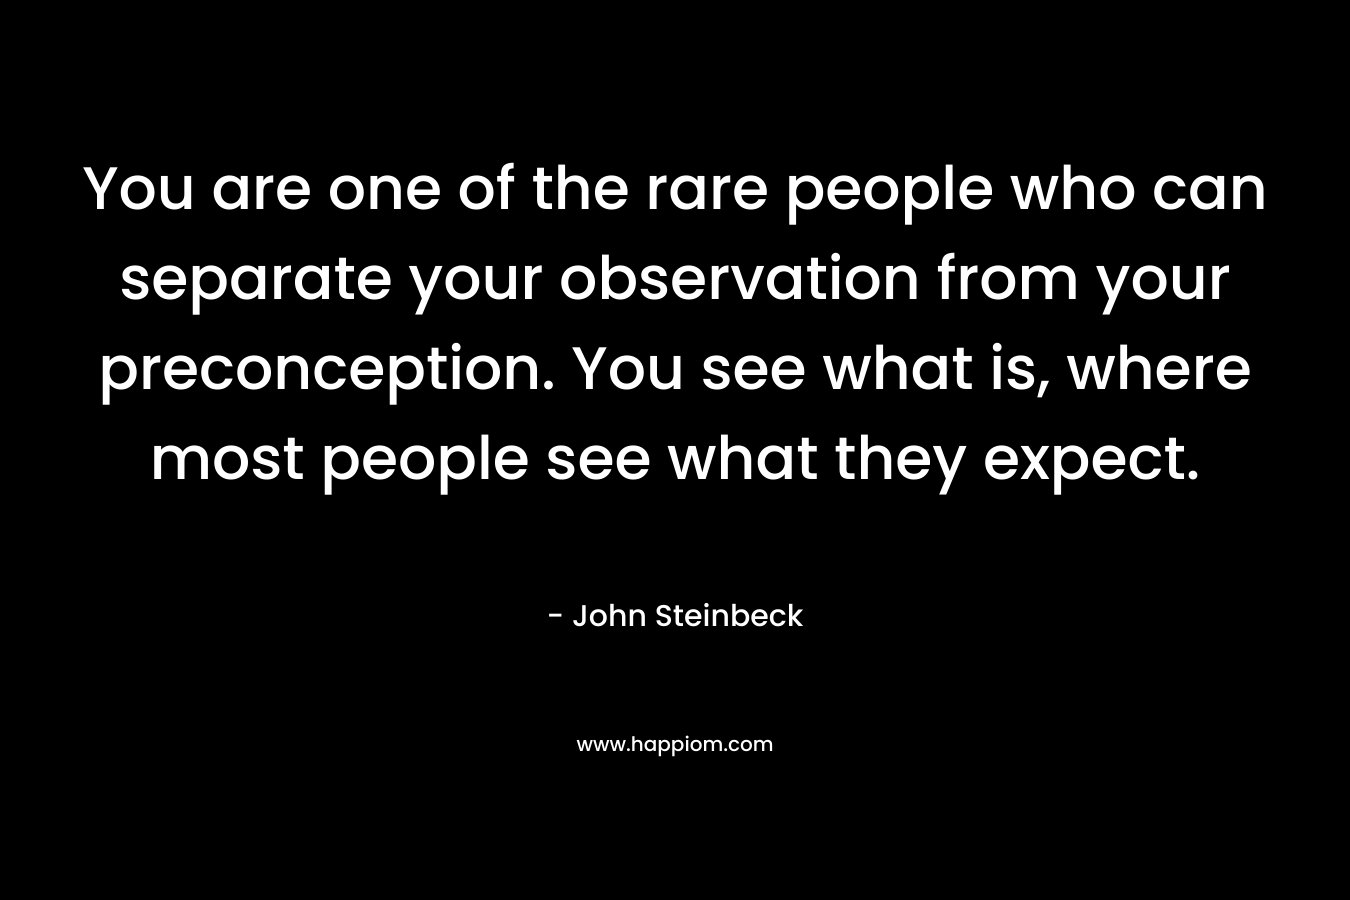 You are one of the rare people who can separate your observation from your preconception. You see what is, where most people see what they expect.